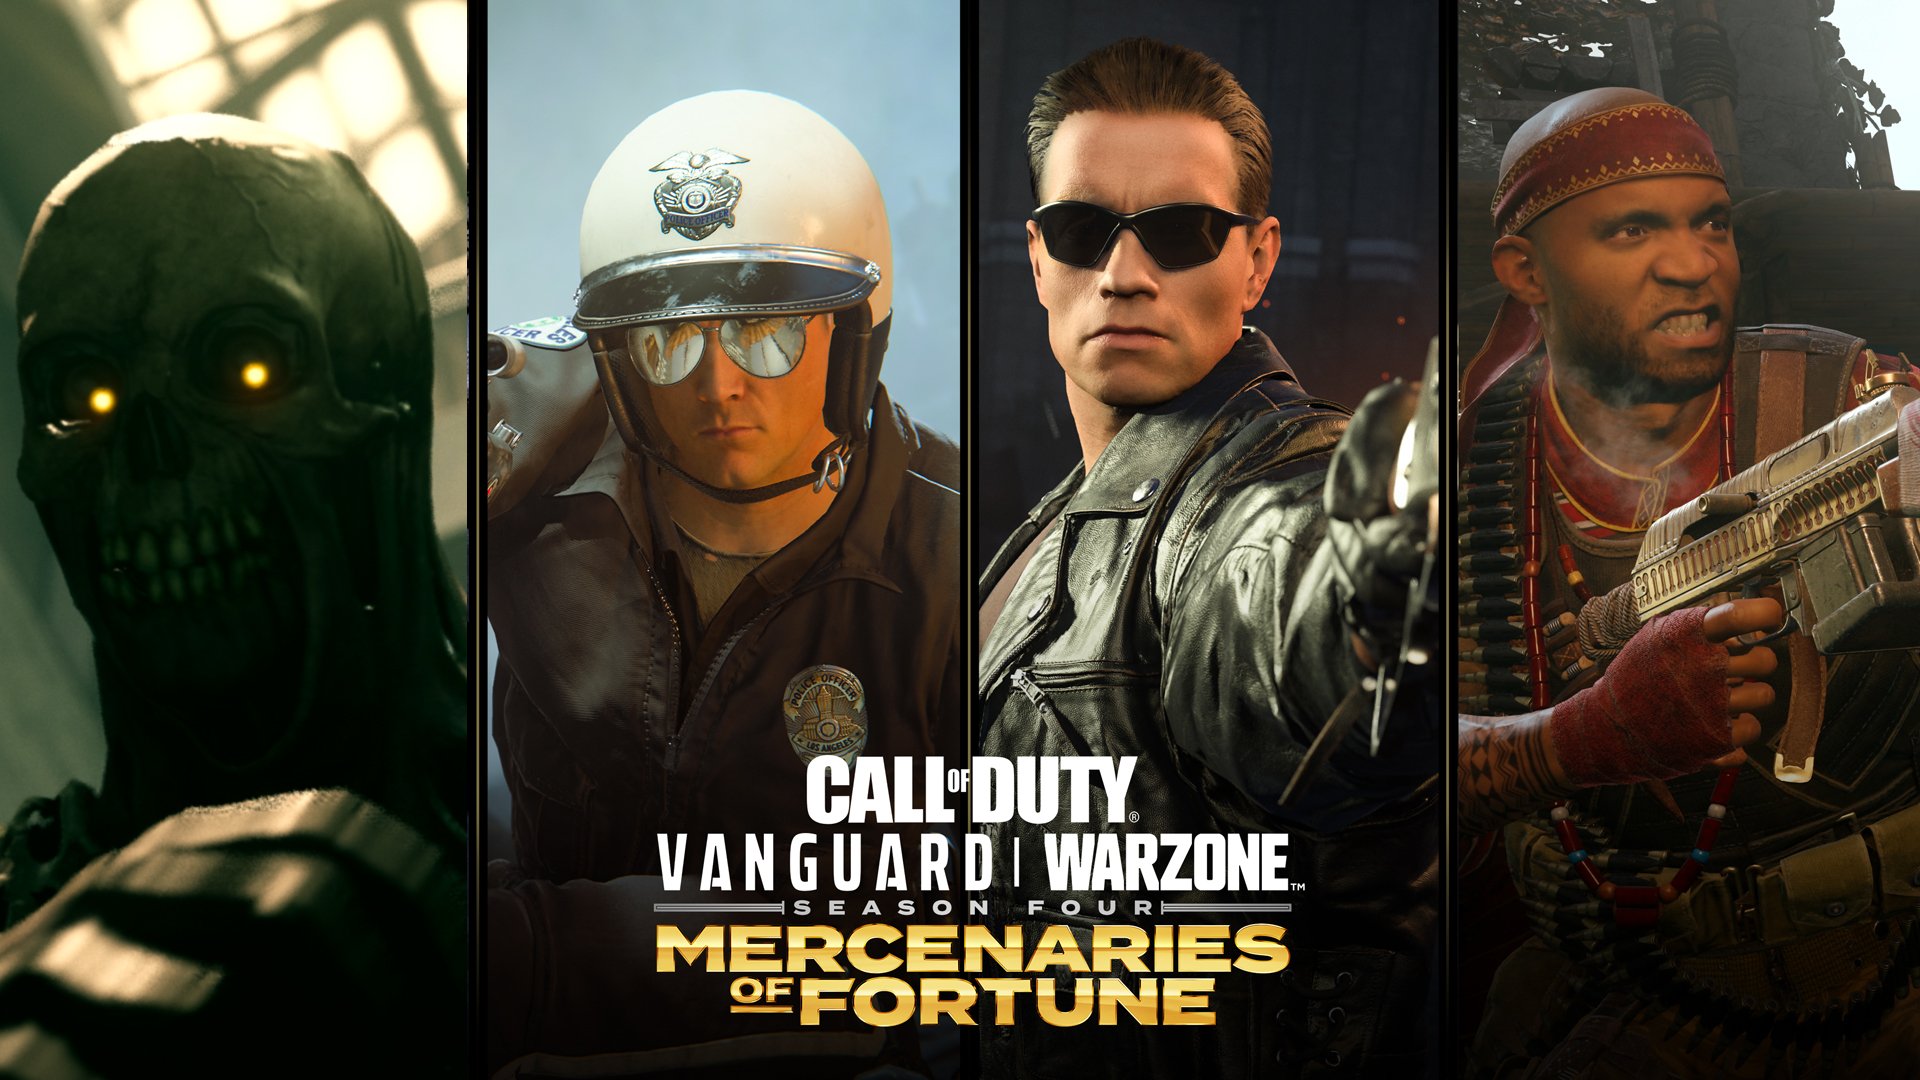 New Limited-Time Terminator Bundles for Call of Duty: Vanguard and Warzone